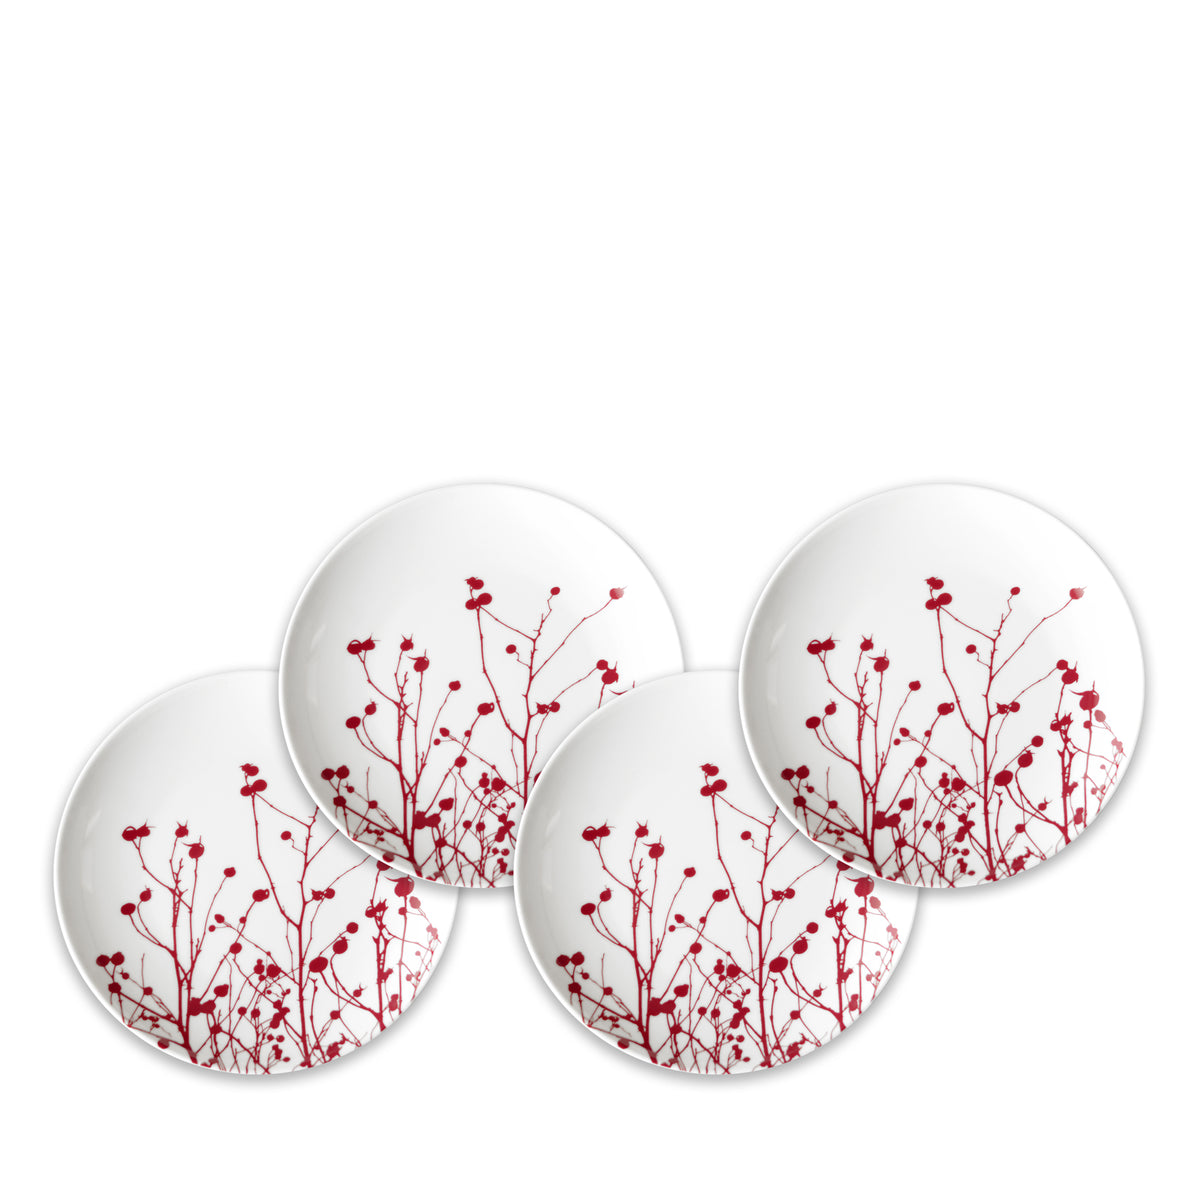 Four **Winterberries Small Plates** by **Caskata Artisanal Home** with a red floral branch design, reminiscent of Winter berries, are arranged in an overlapping pattern.